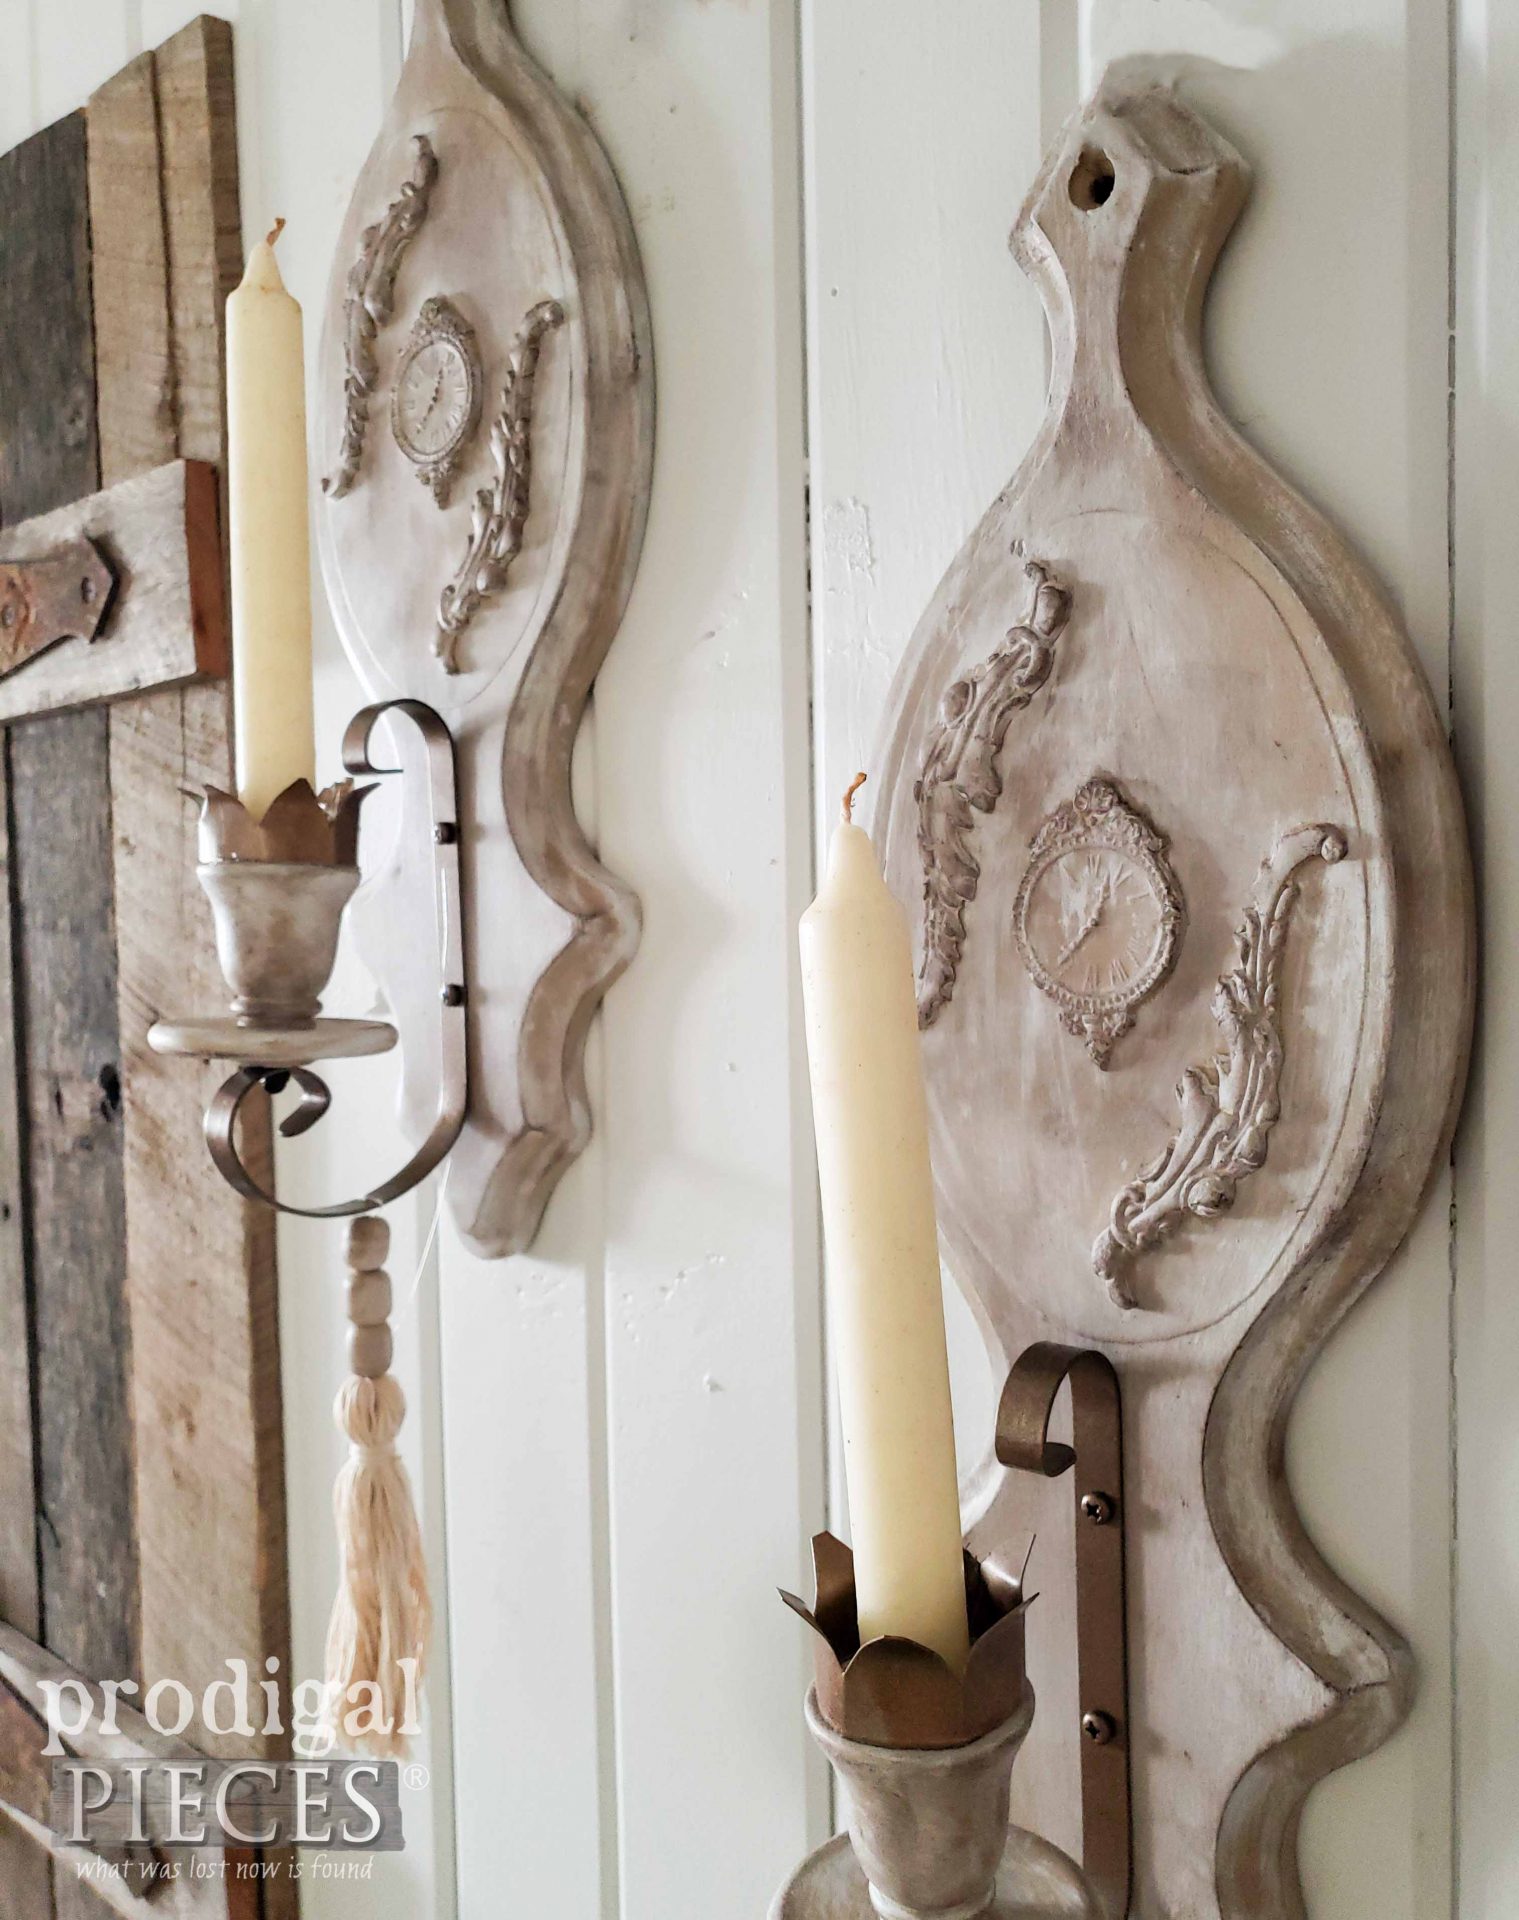 Pair of Vintage Candle Sconces with Farmhouse Style by Larissa of Prodigal Pieces | prodigalpieces.com #prodigalpieces #diy #home #homedecor #farmhouse #vintage